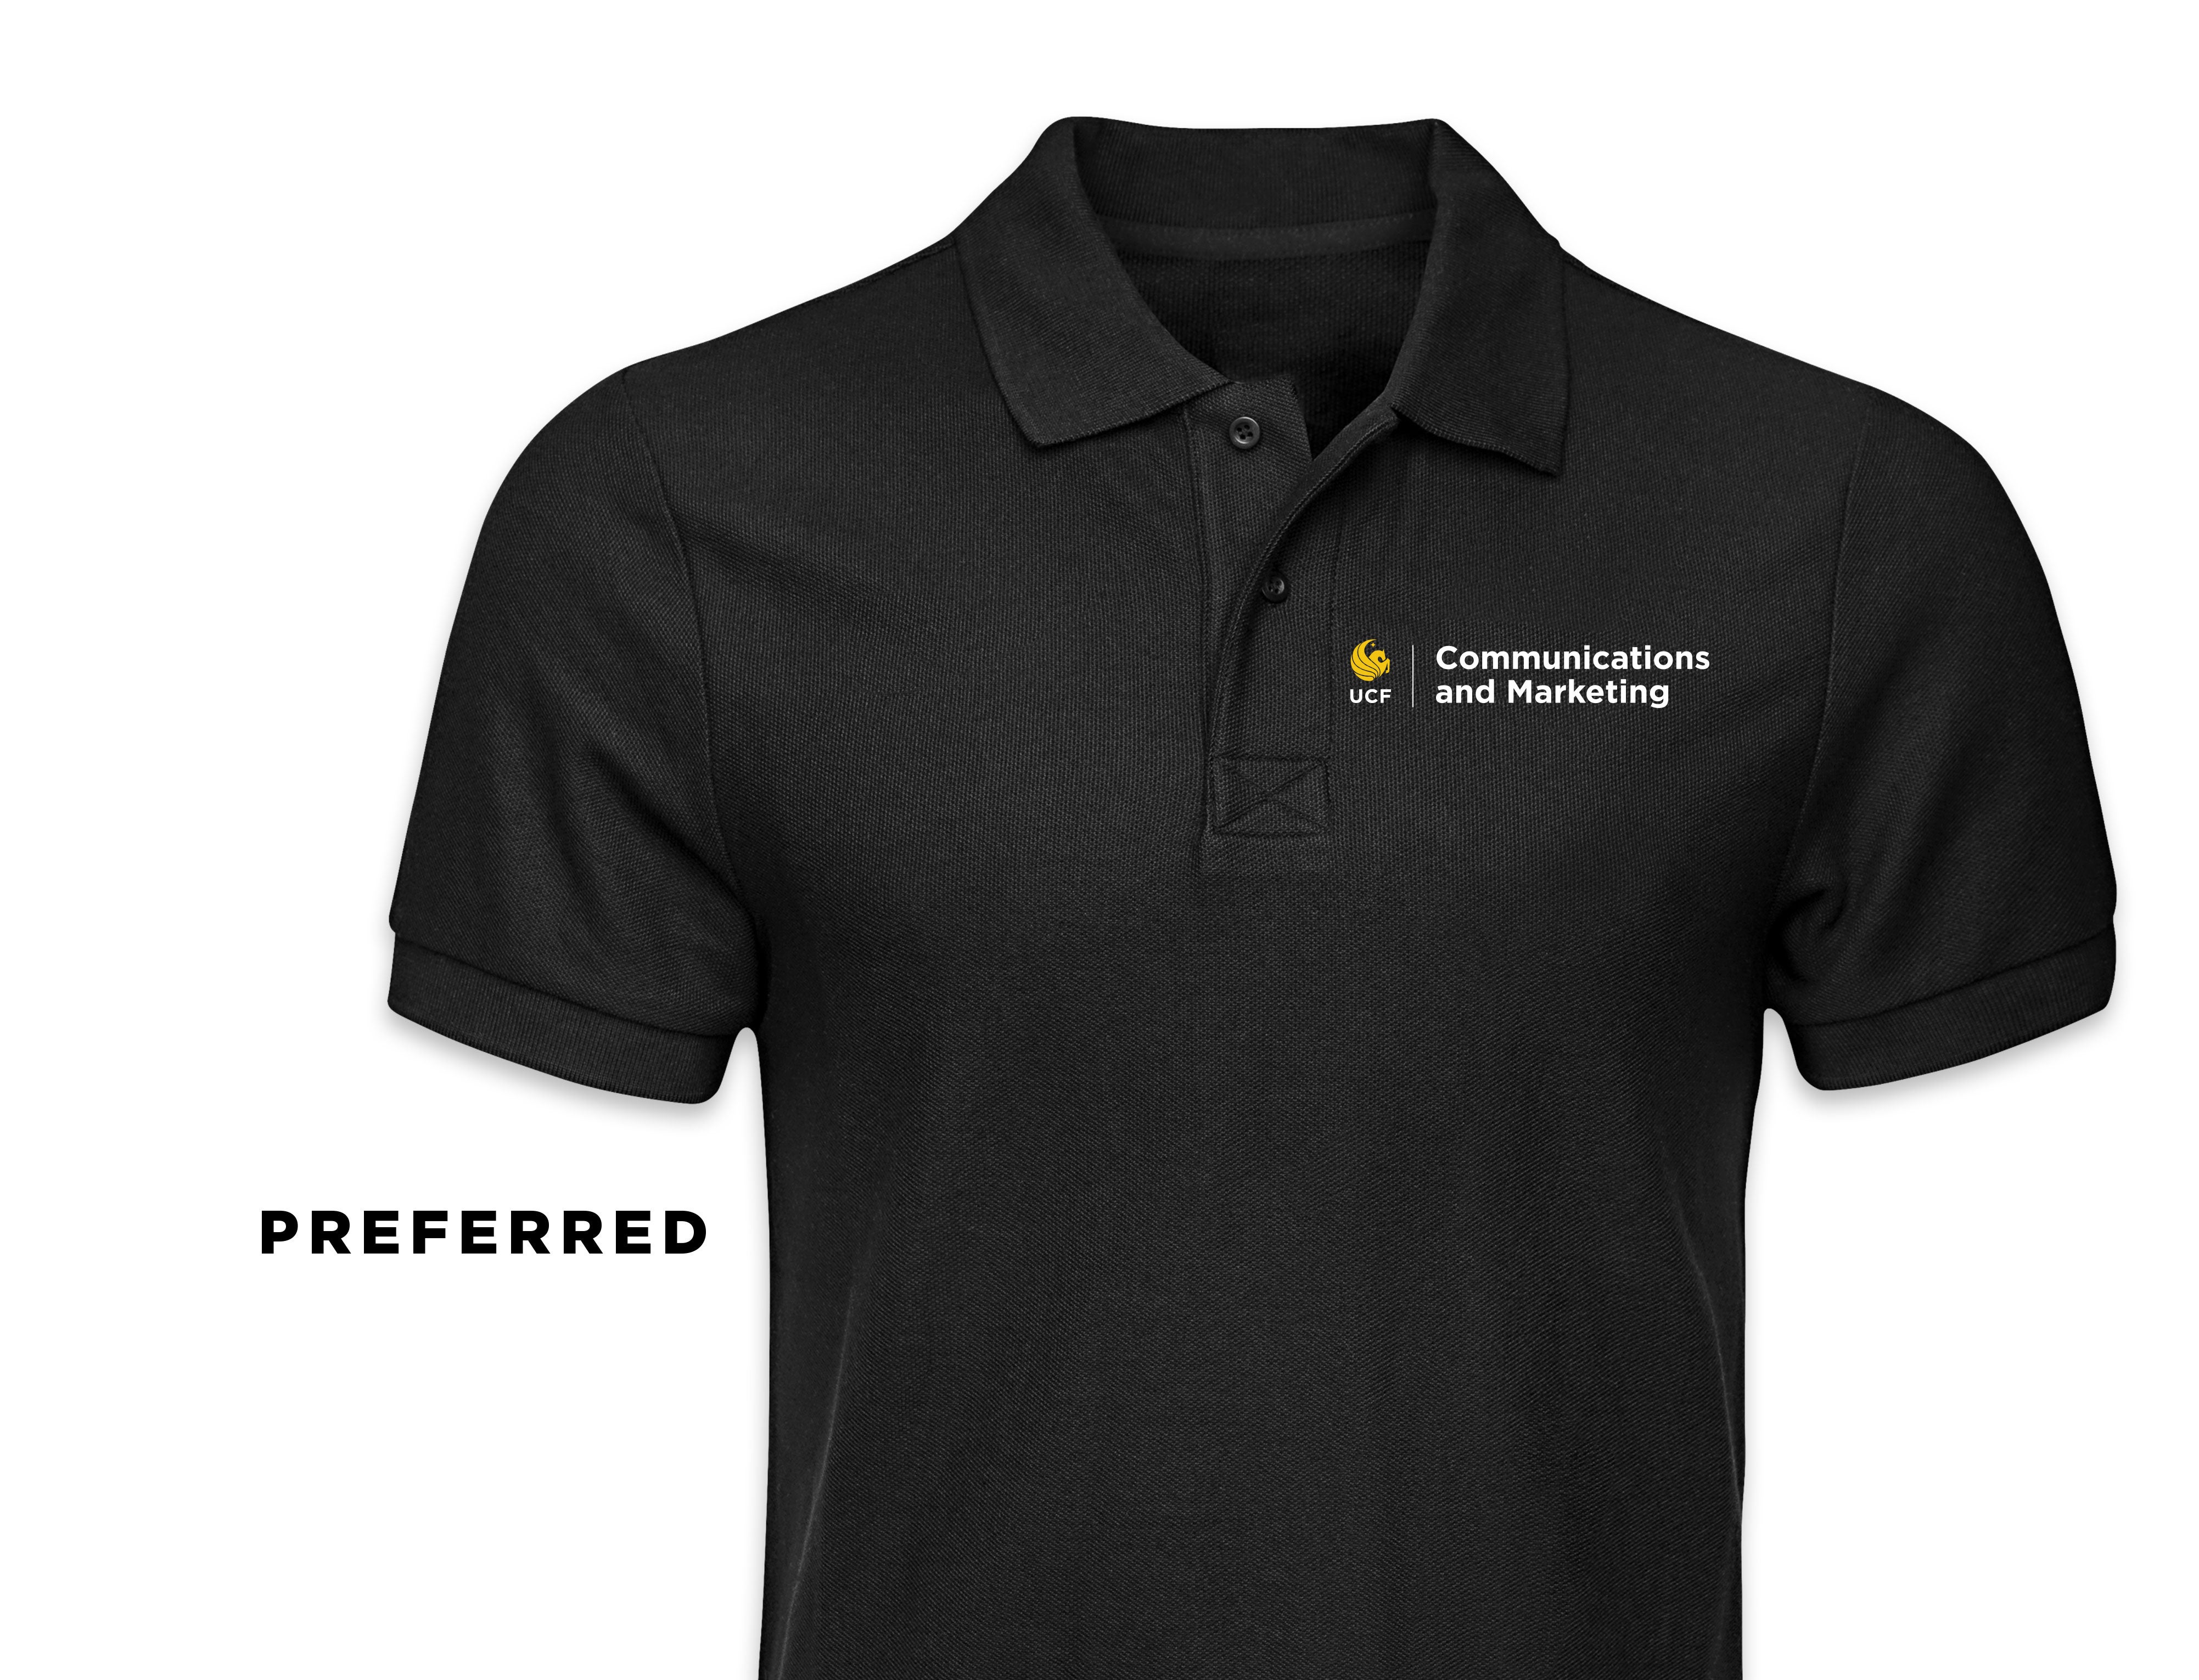 The preferred polo shirt design uses your Unit Identity Lockup to the left of the buttons.